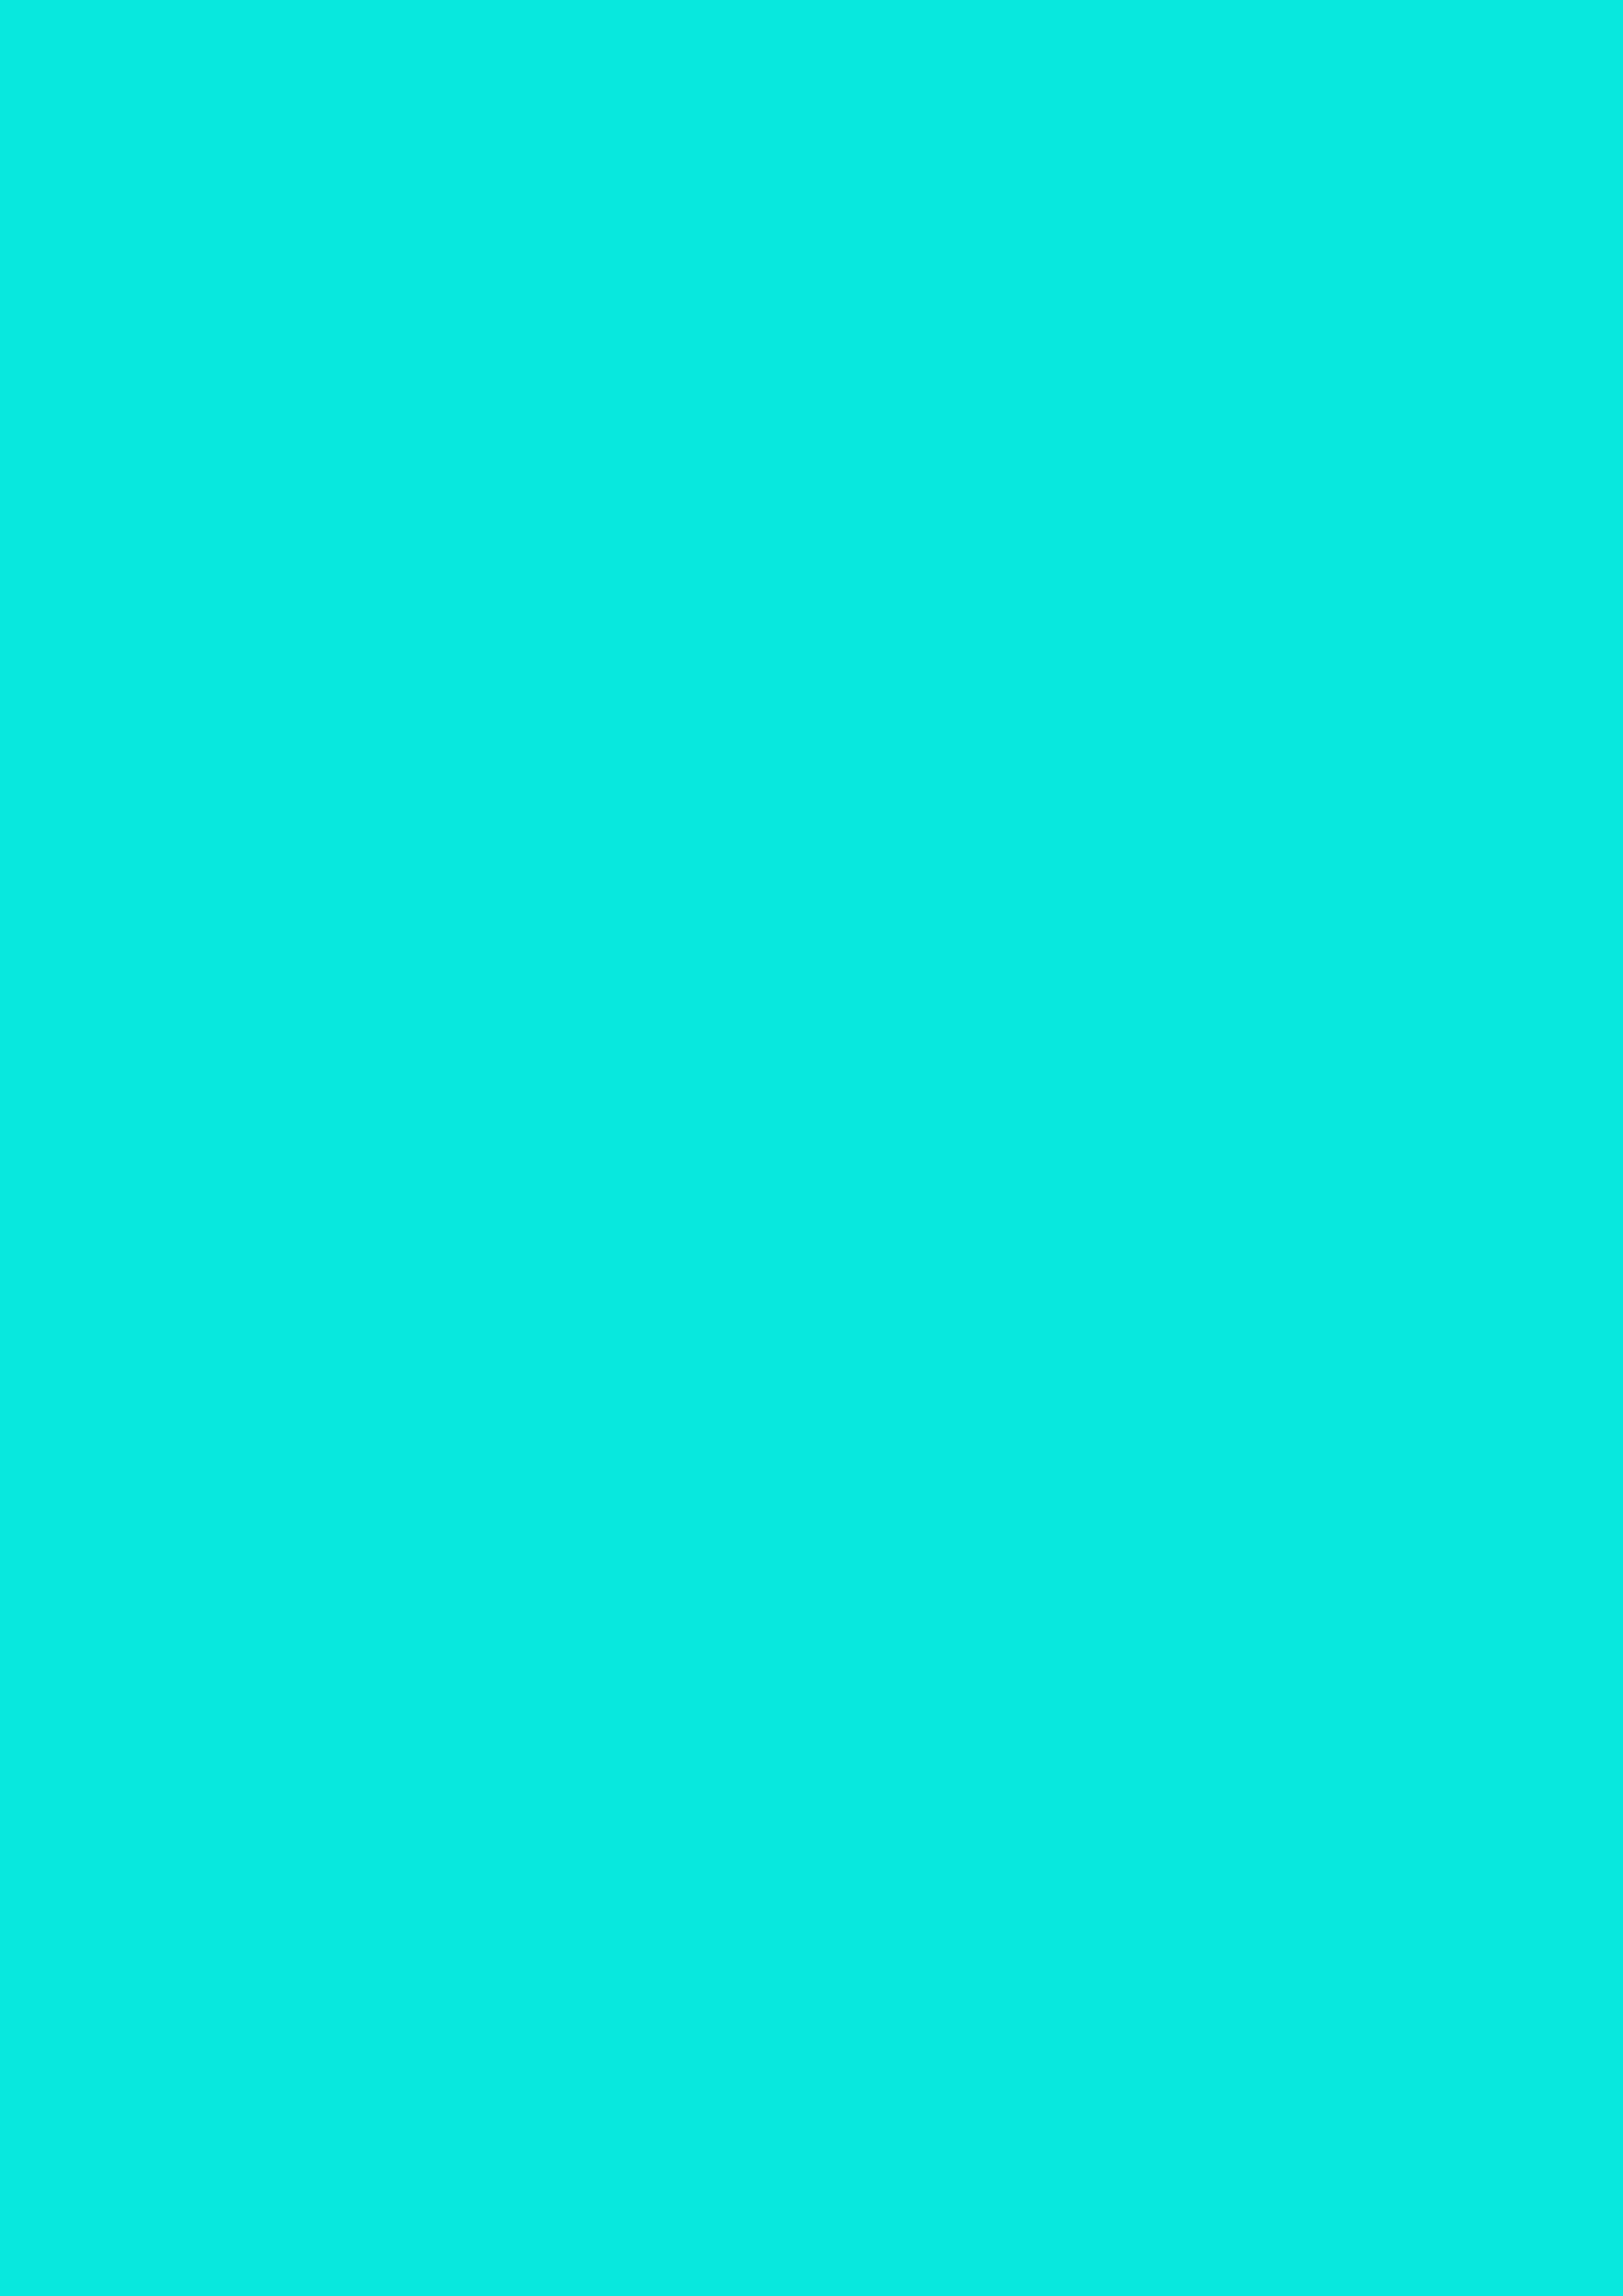 2480x3508 Bright Turquoise Solid Color Background